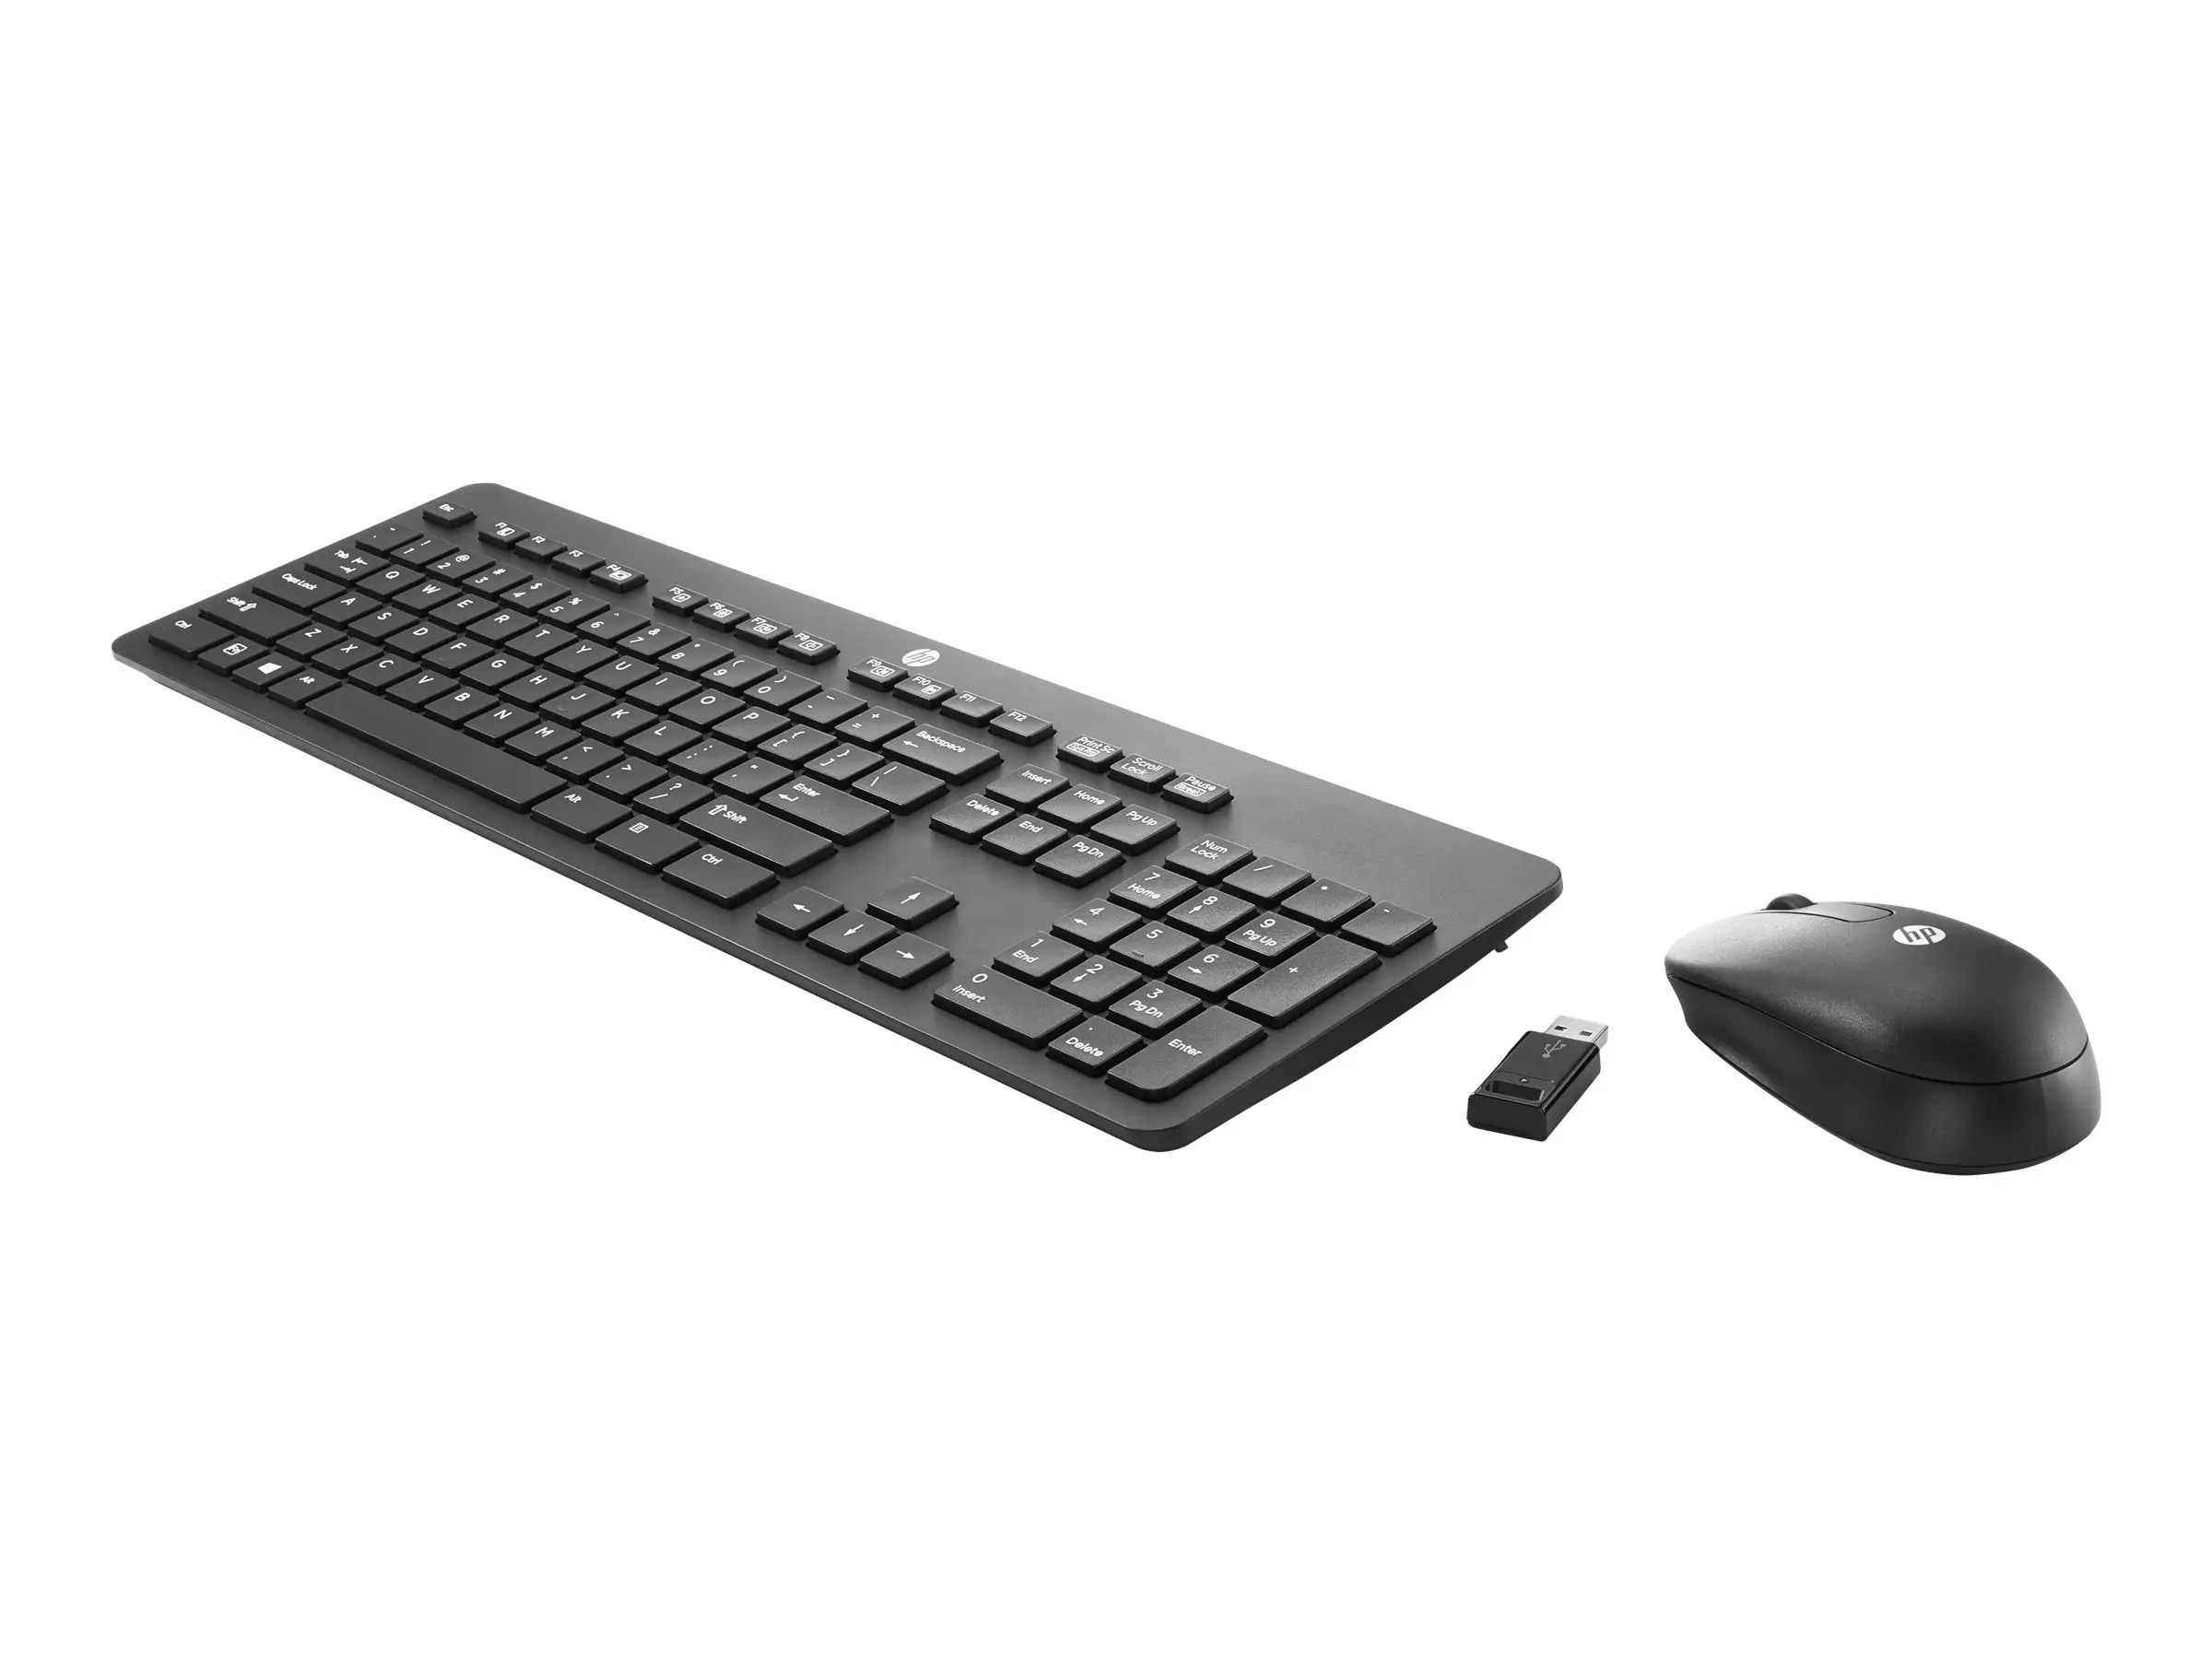 hewlett packard keyboard key to ouput to projector - What is the function key for screen display